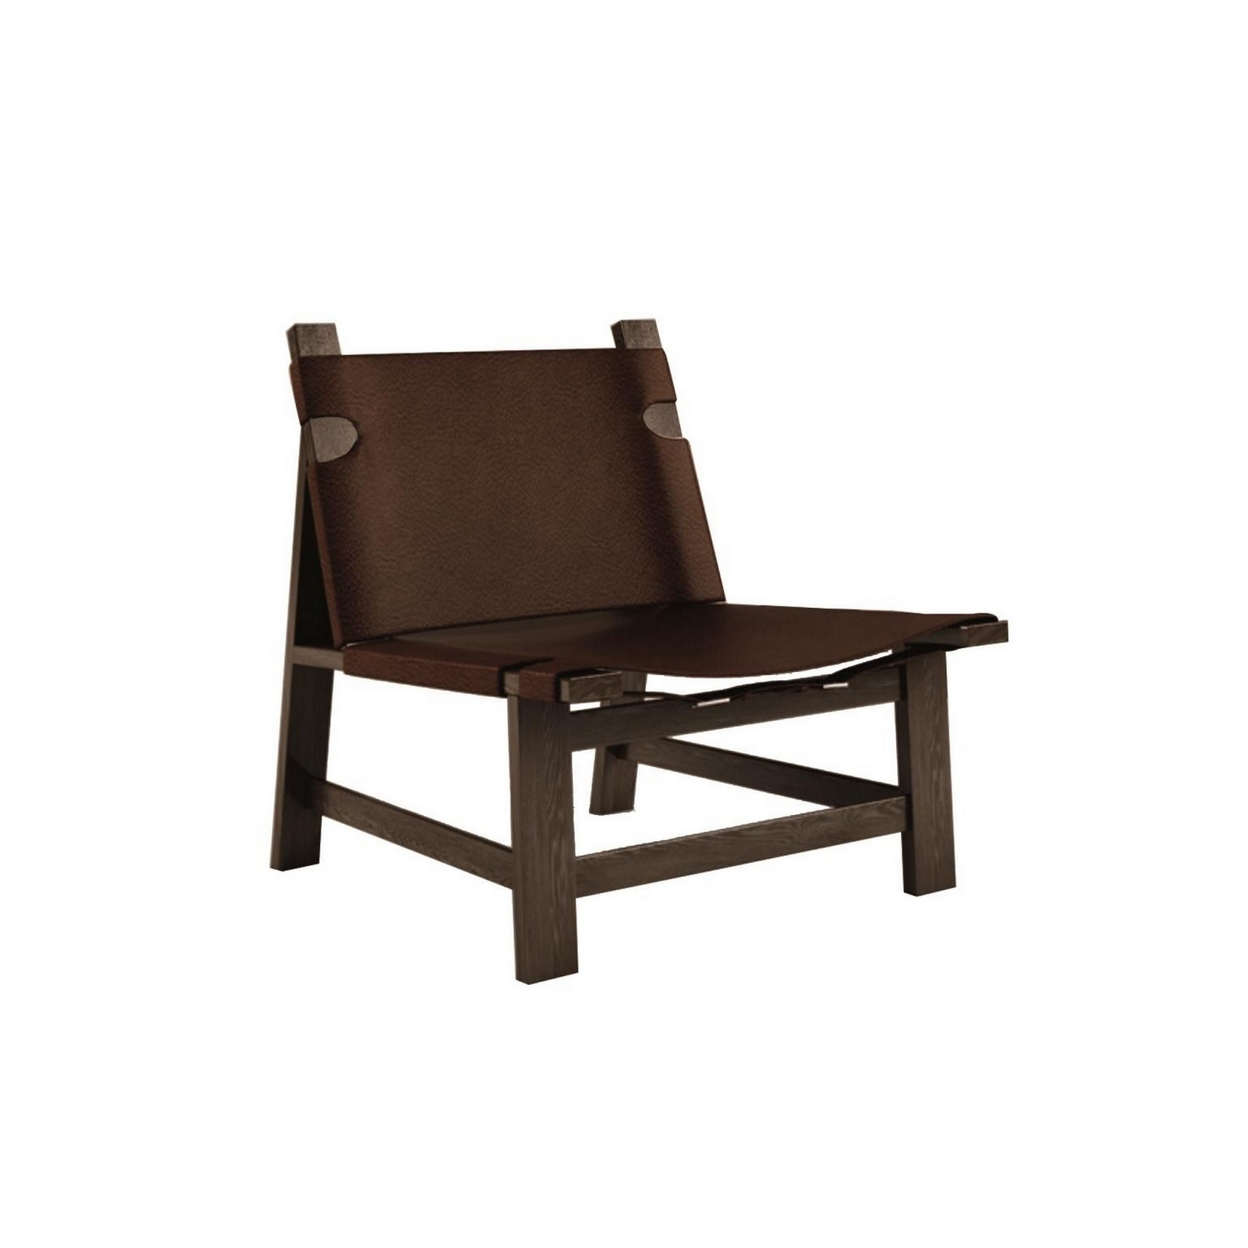 33 Inch Armless Accent Chair, Leather Upholstery, Rich Brown Textured Wood- Saltoro Sherpi